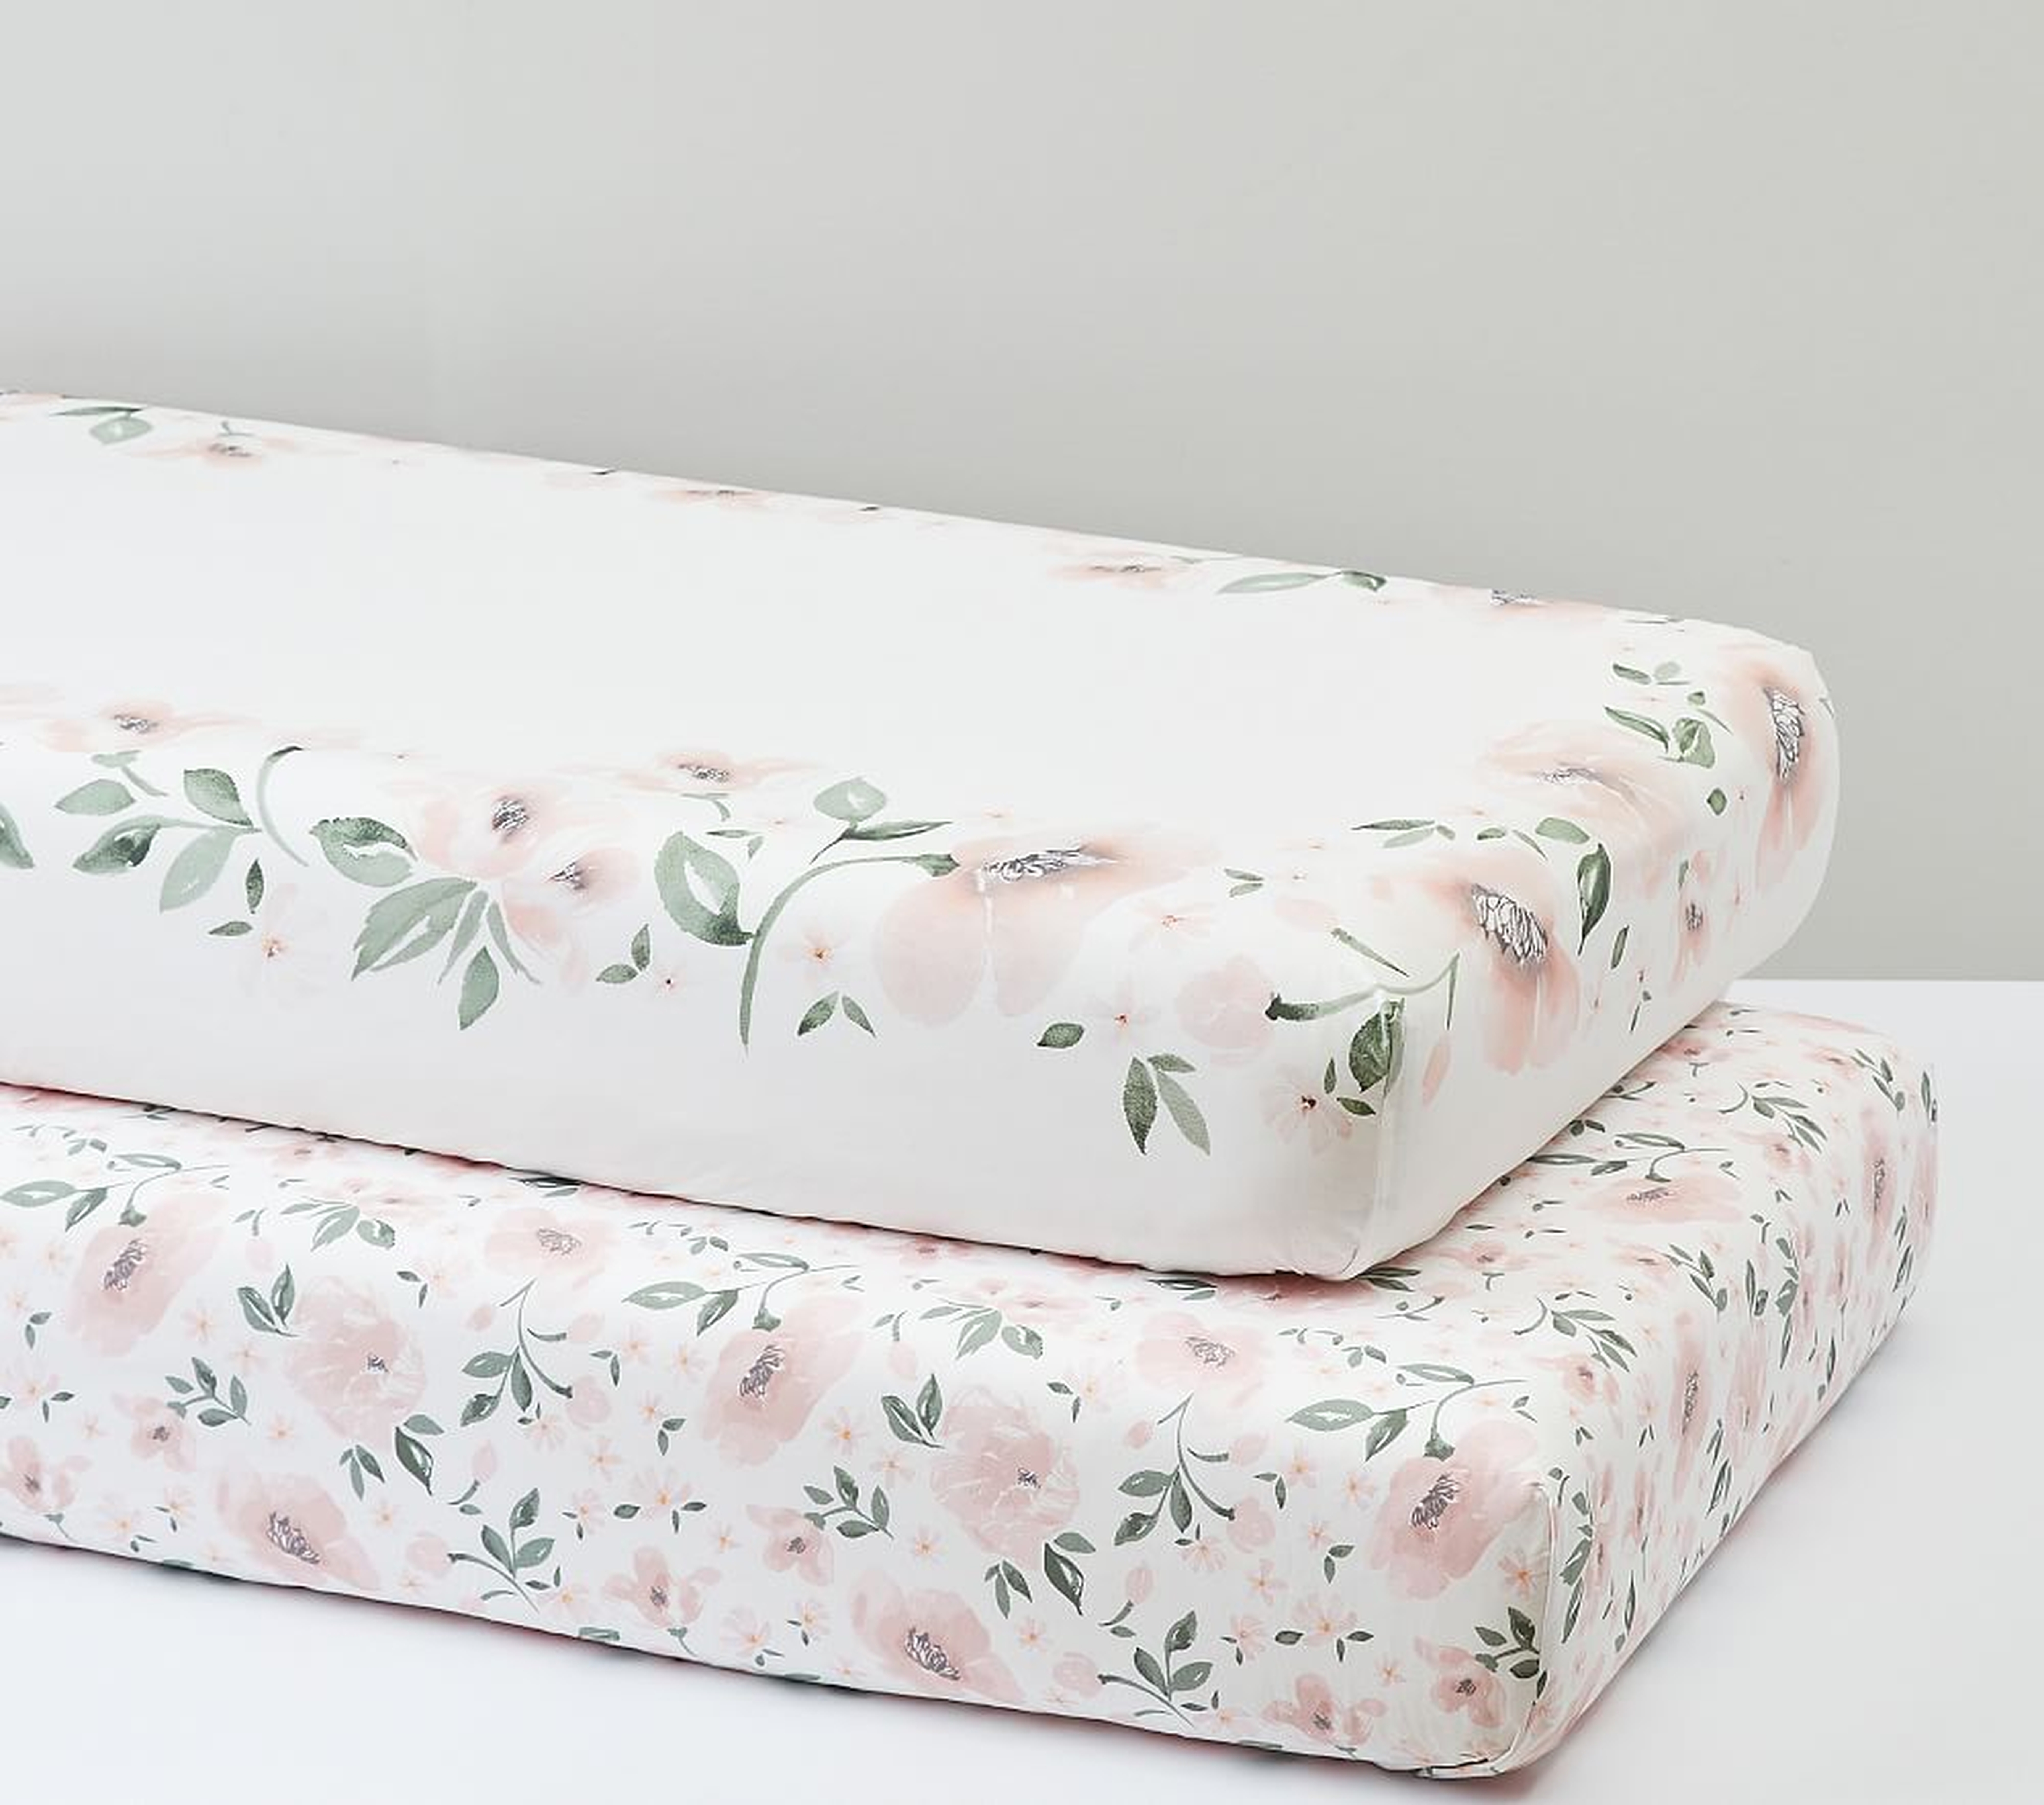 Organic Meredith Picture Perfect & Allover Floral Crib Fitted Sheet Bundle - Set of 2 - Pottery Barn Kids